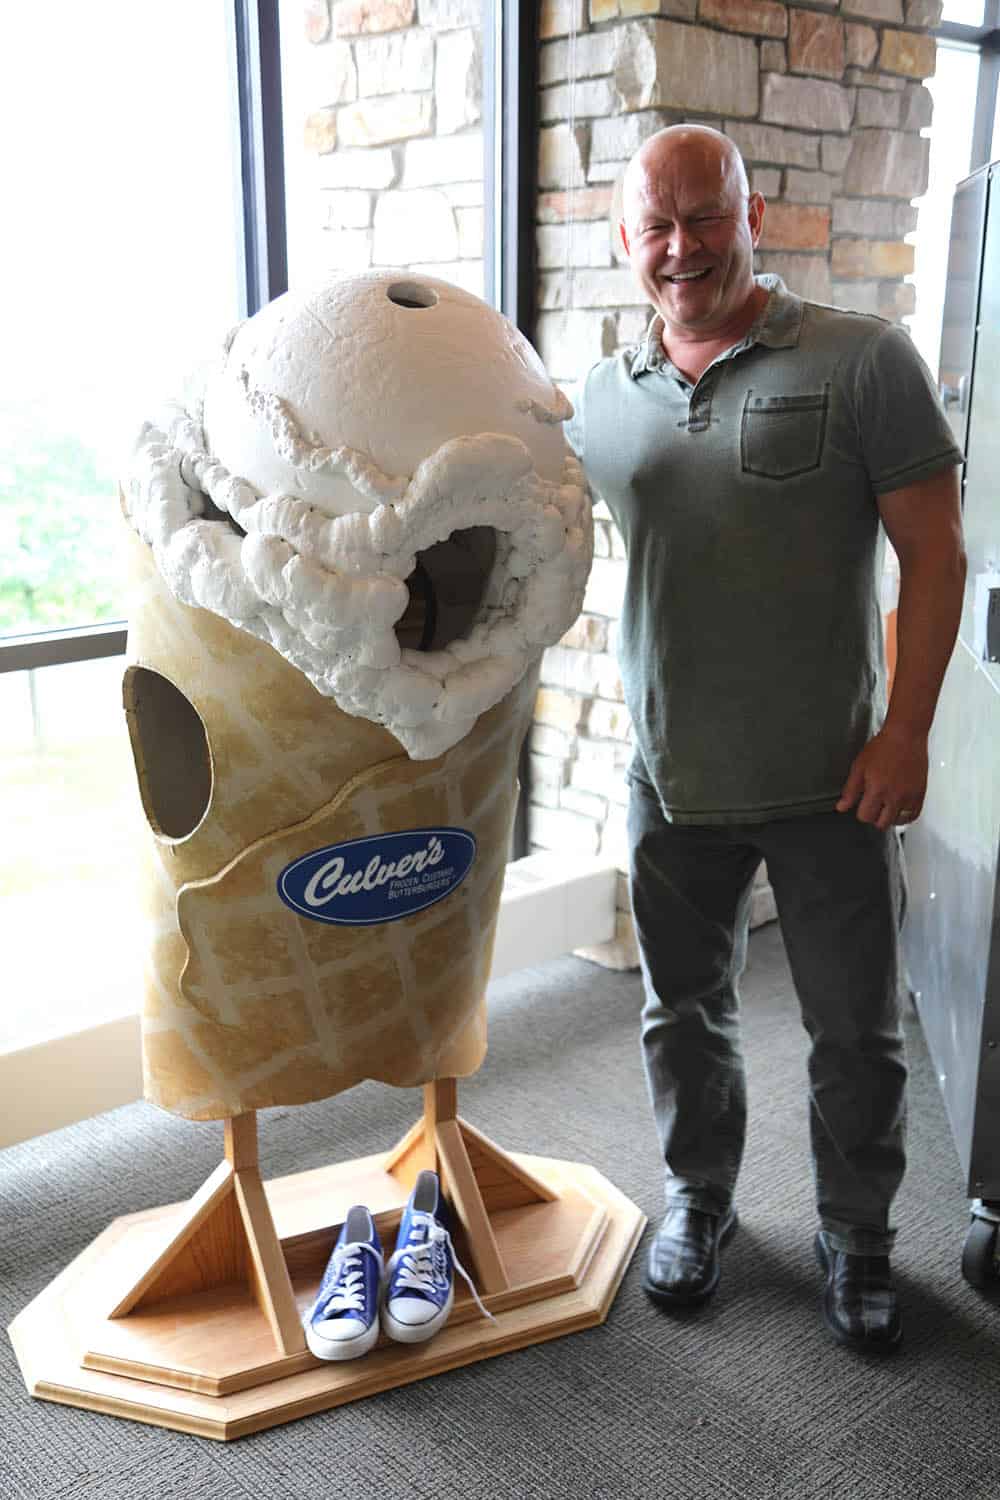 Mike Hultquist with the original Culver's custard suit